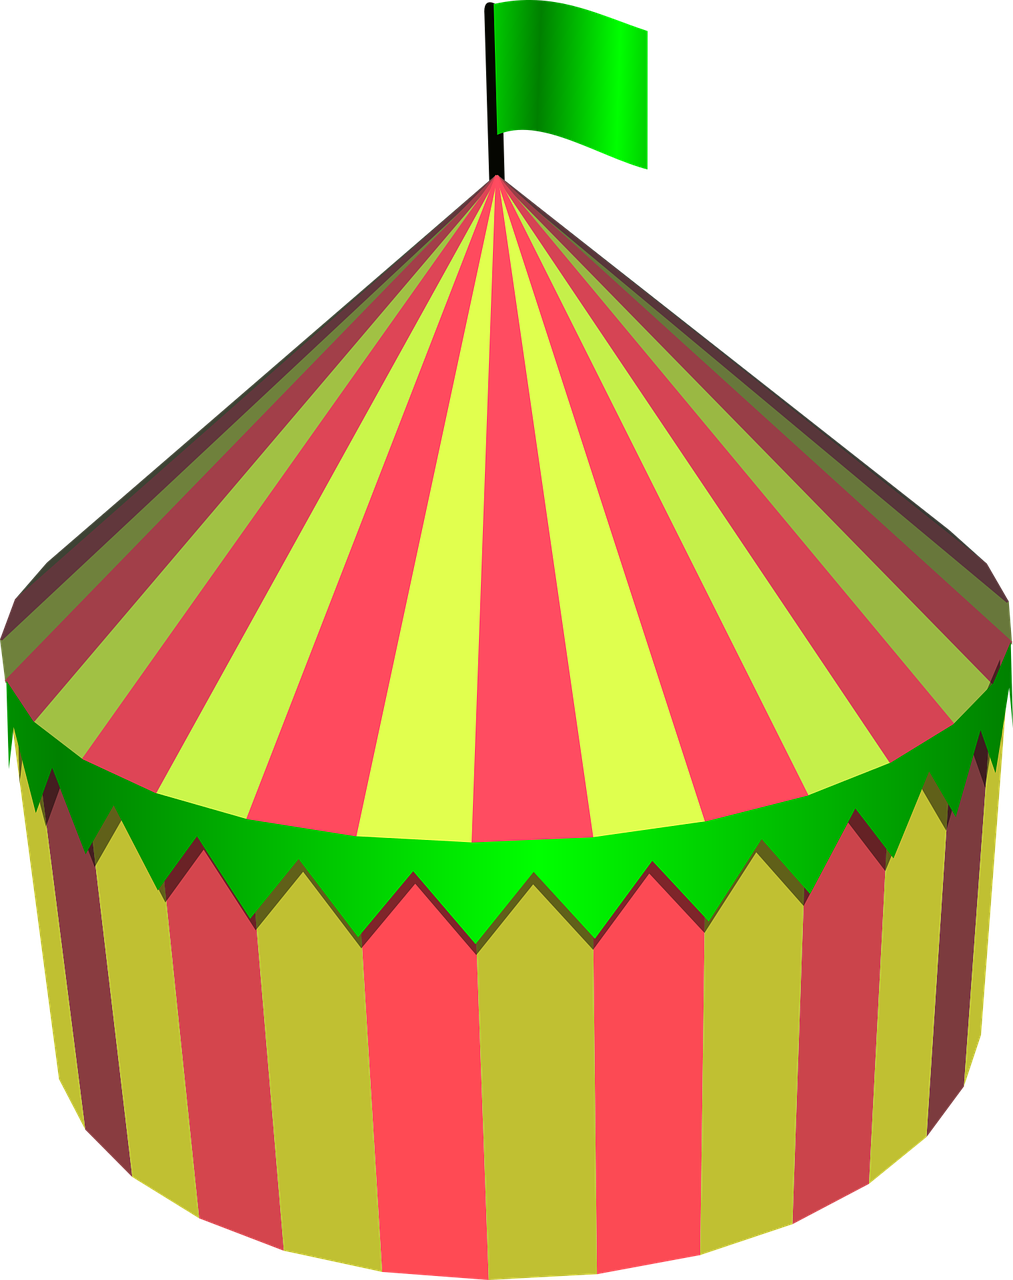 a circus tent with a flag on top, a screenshot, optical illusion, fancy funny hat, super sharp image, red green yellow color scheme, toddler